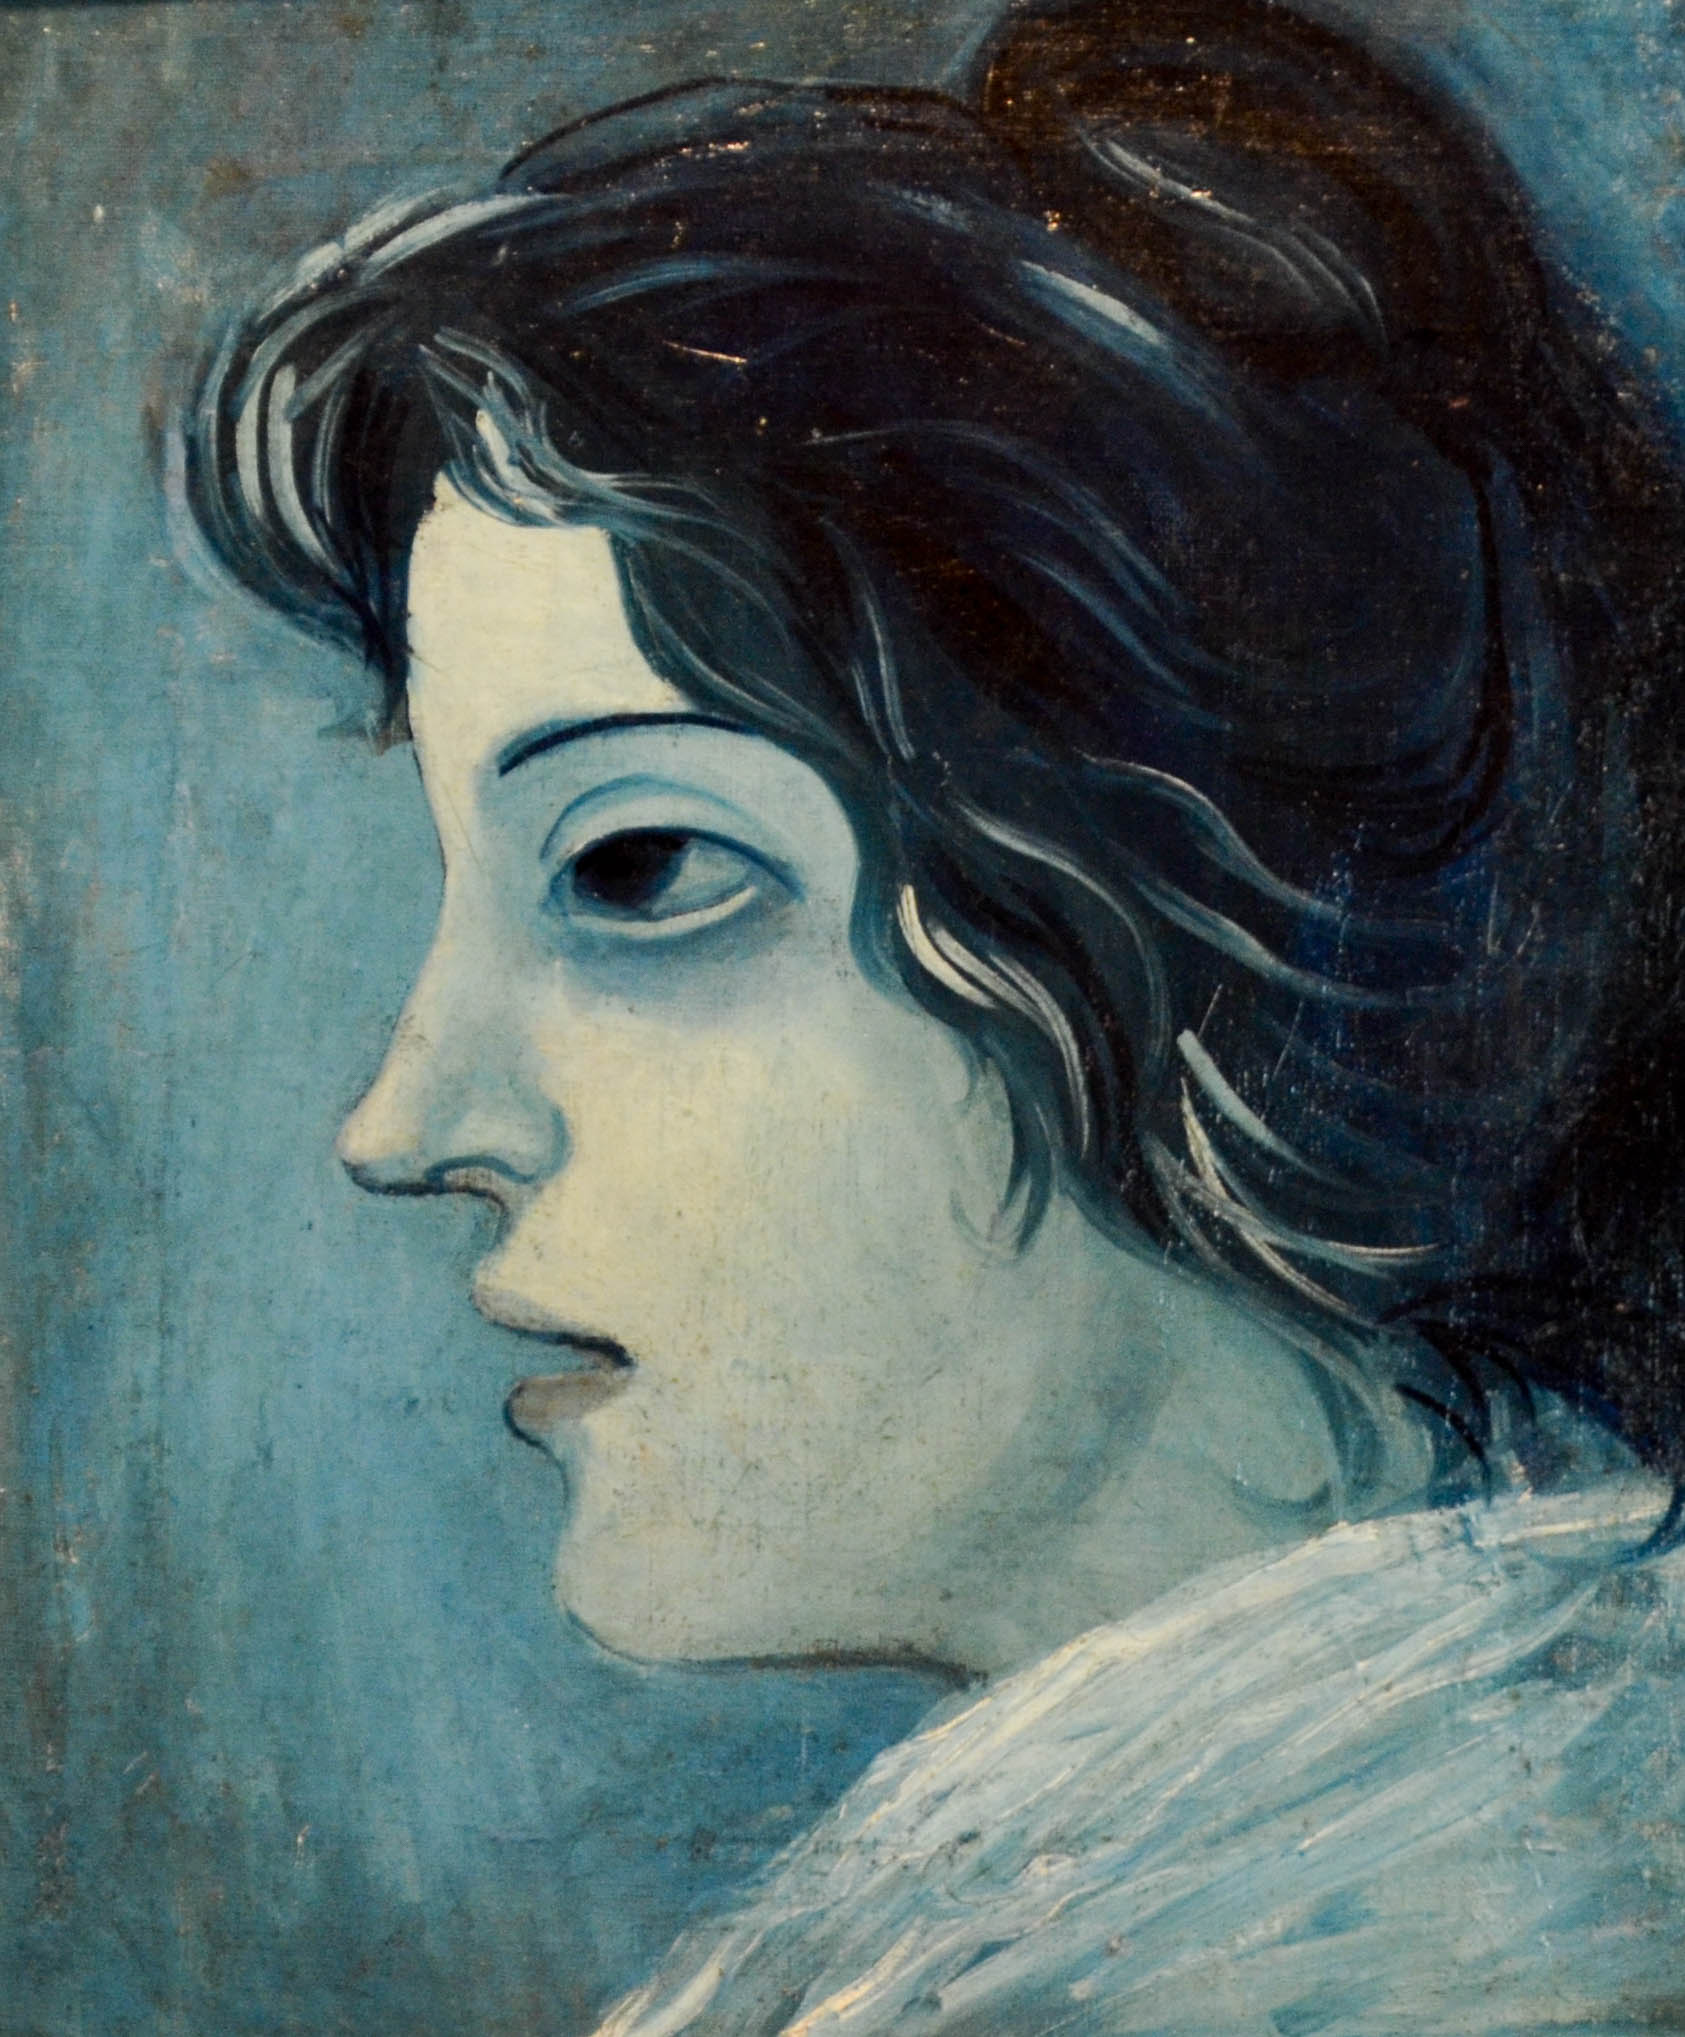 "Woman's Head" by Pablo Picasso, 1903.